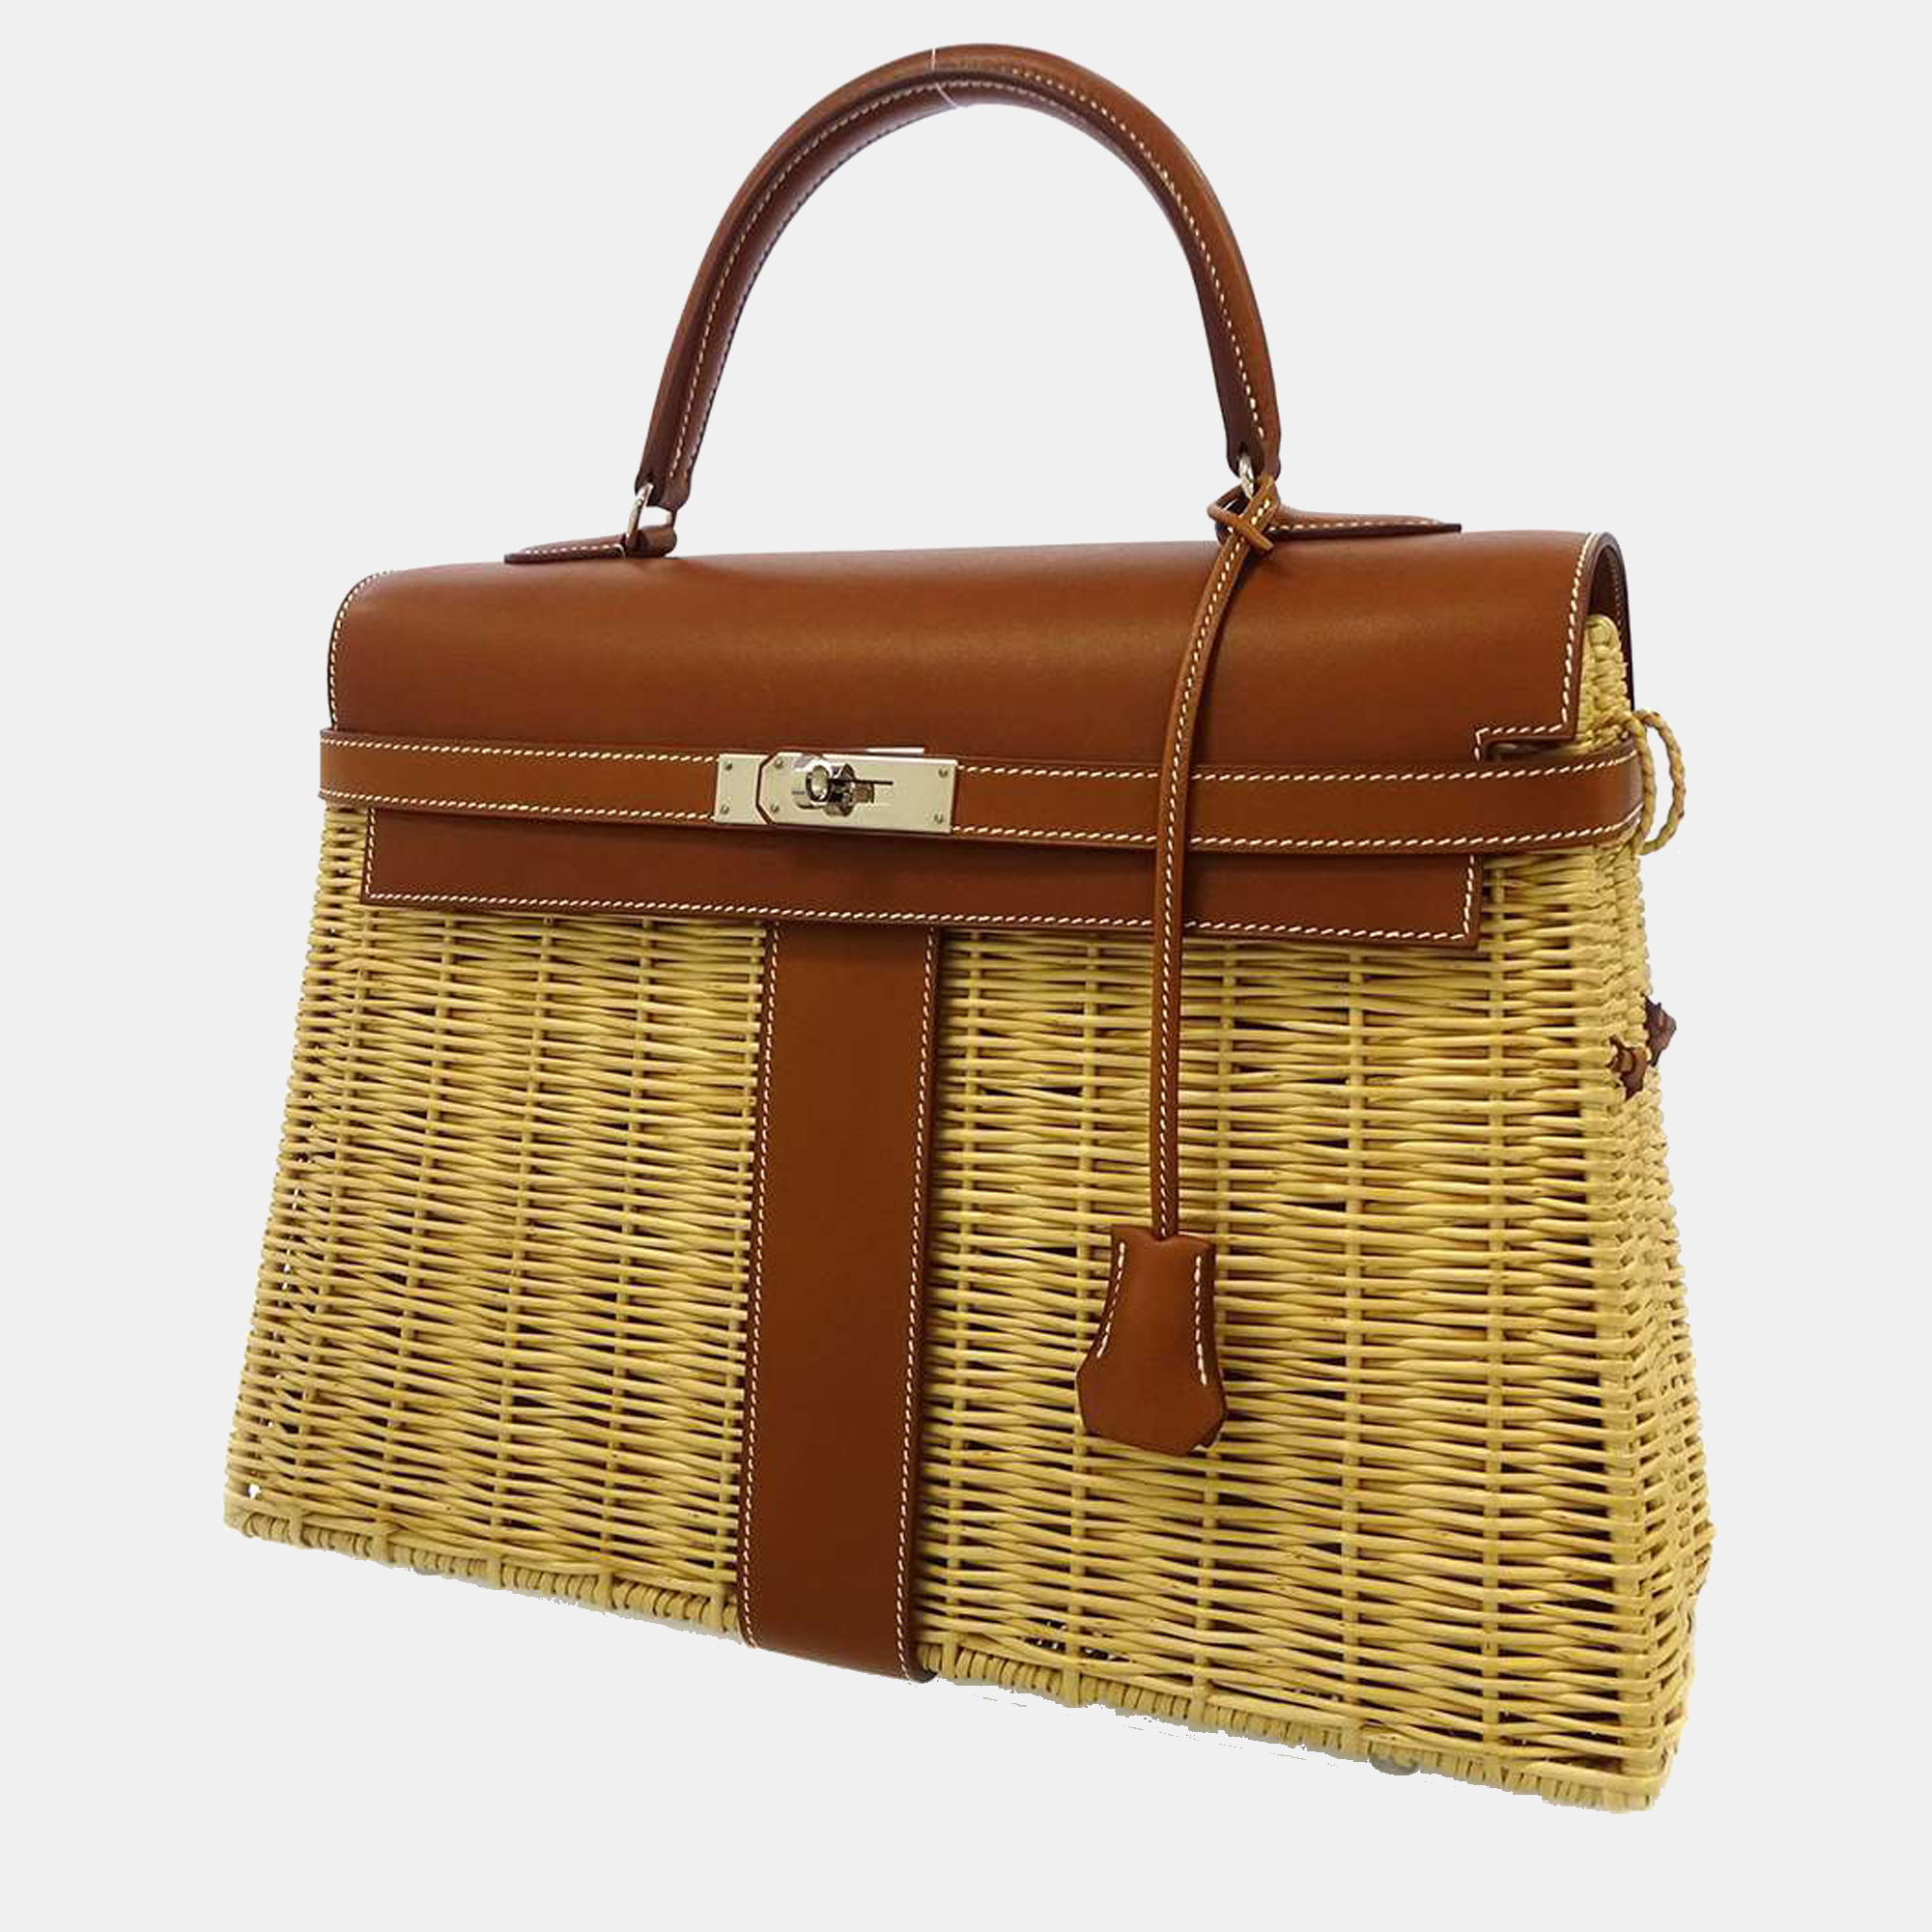 Hermes Brown Leather Palladium Hardware Limited Edition Barenia Wicker Picnic Kelly 35 Bag